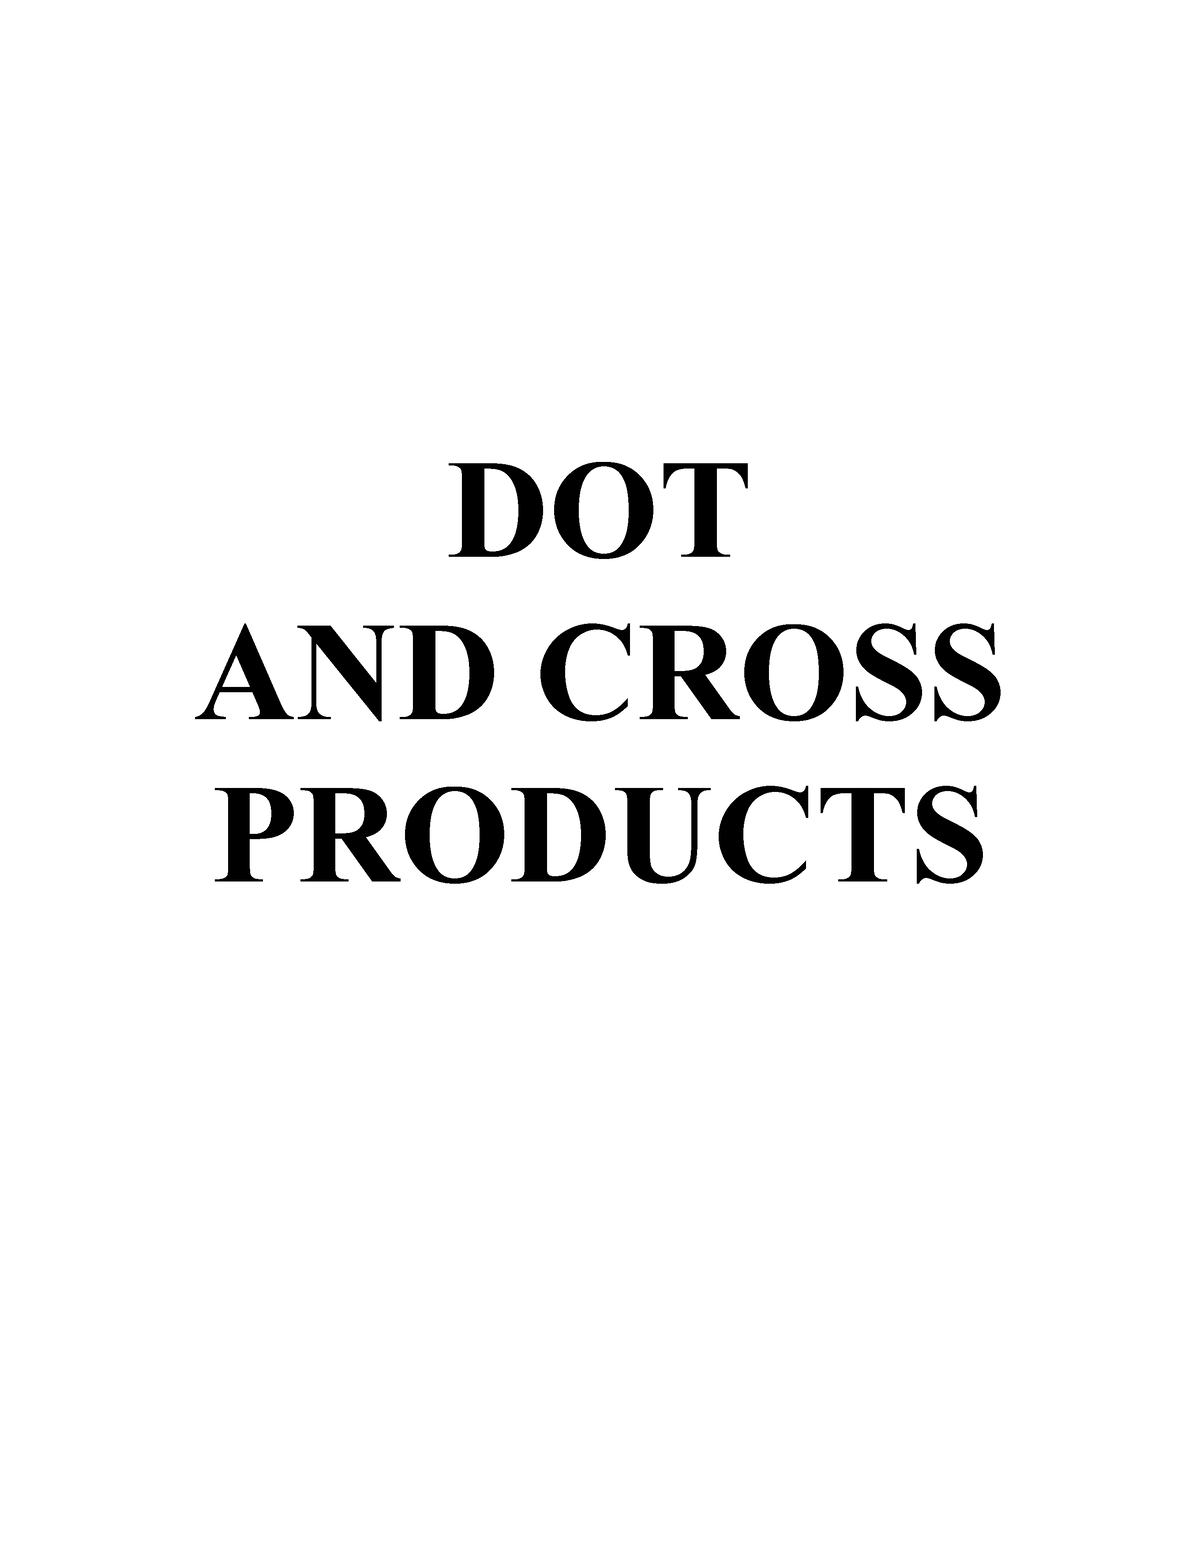 dot-and-cross-products-dot-and-cross-products-dot-product-def-dot